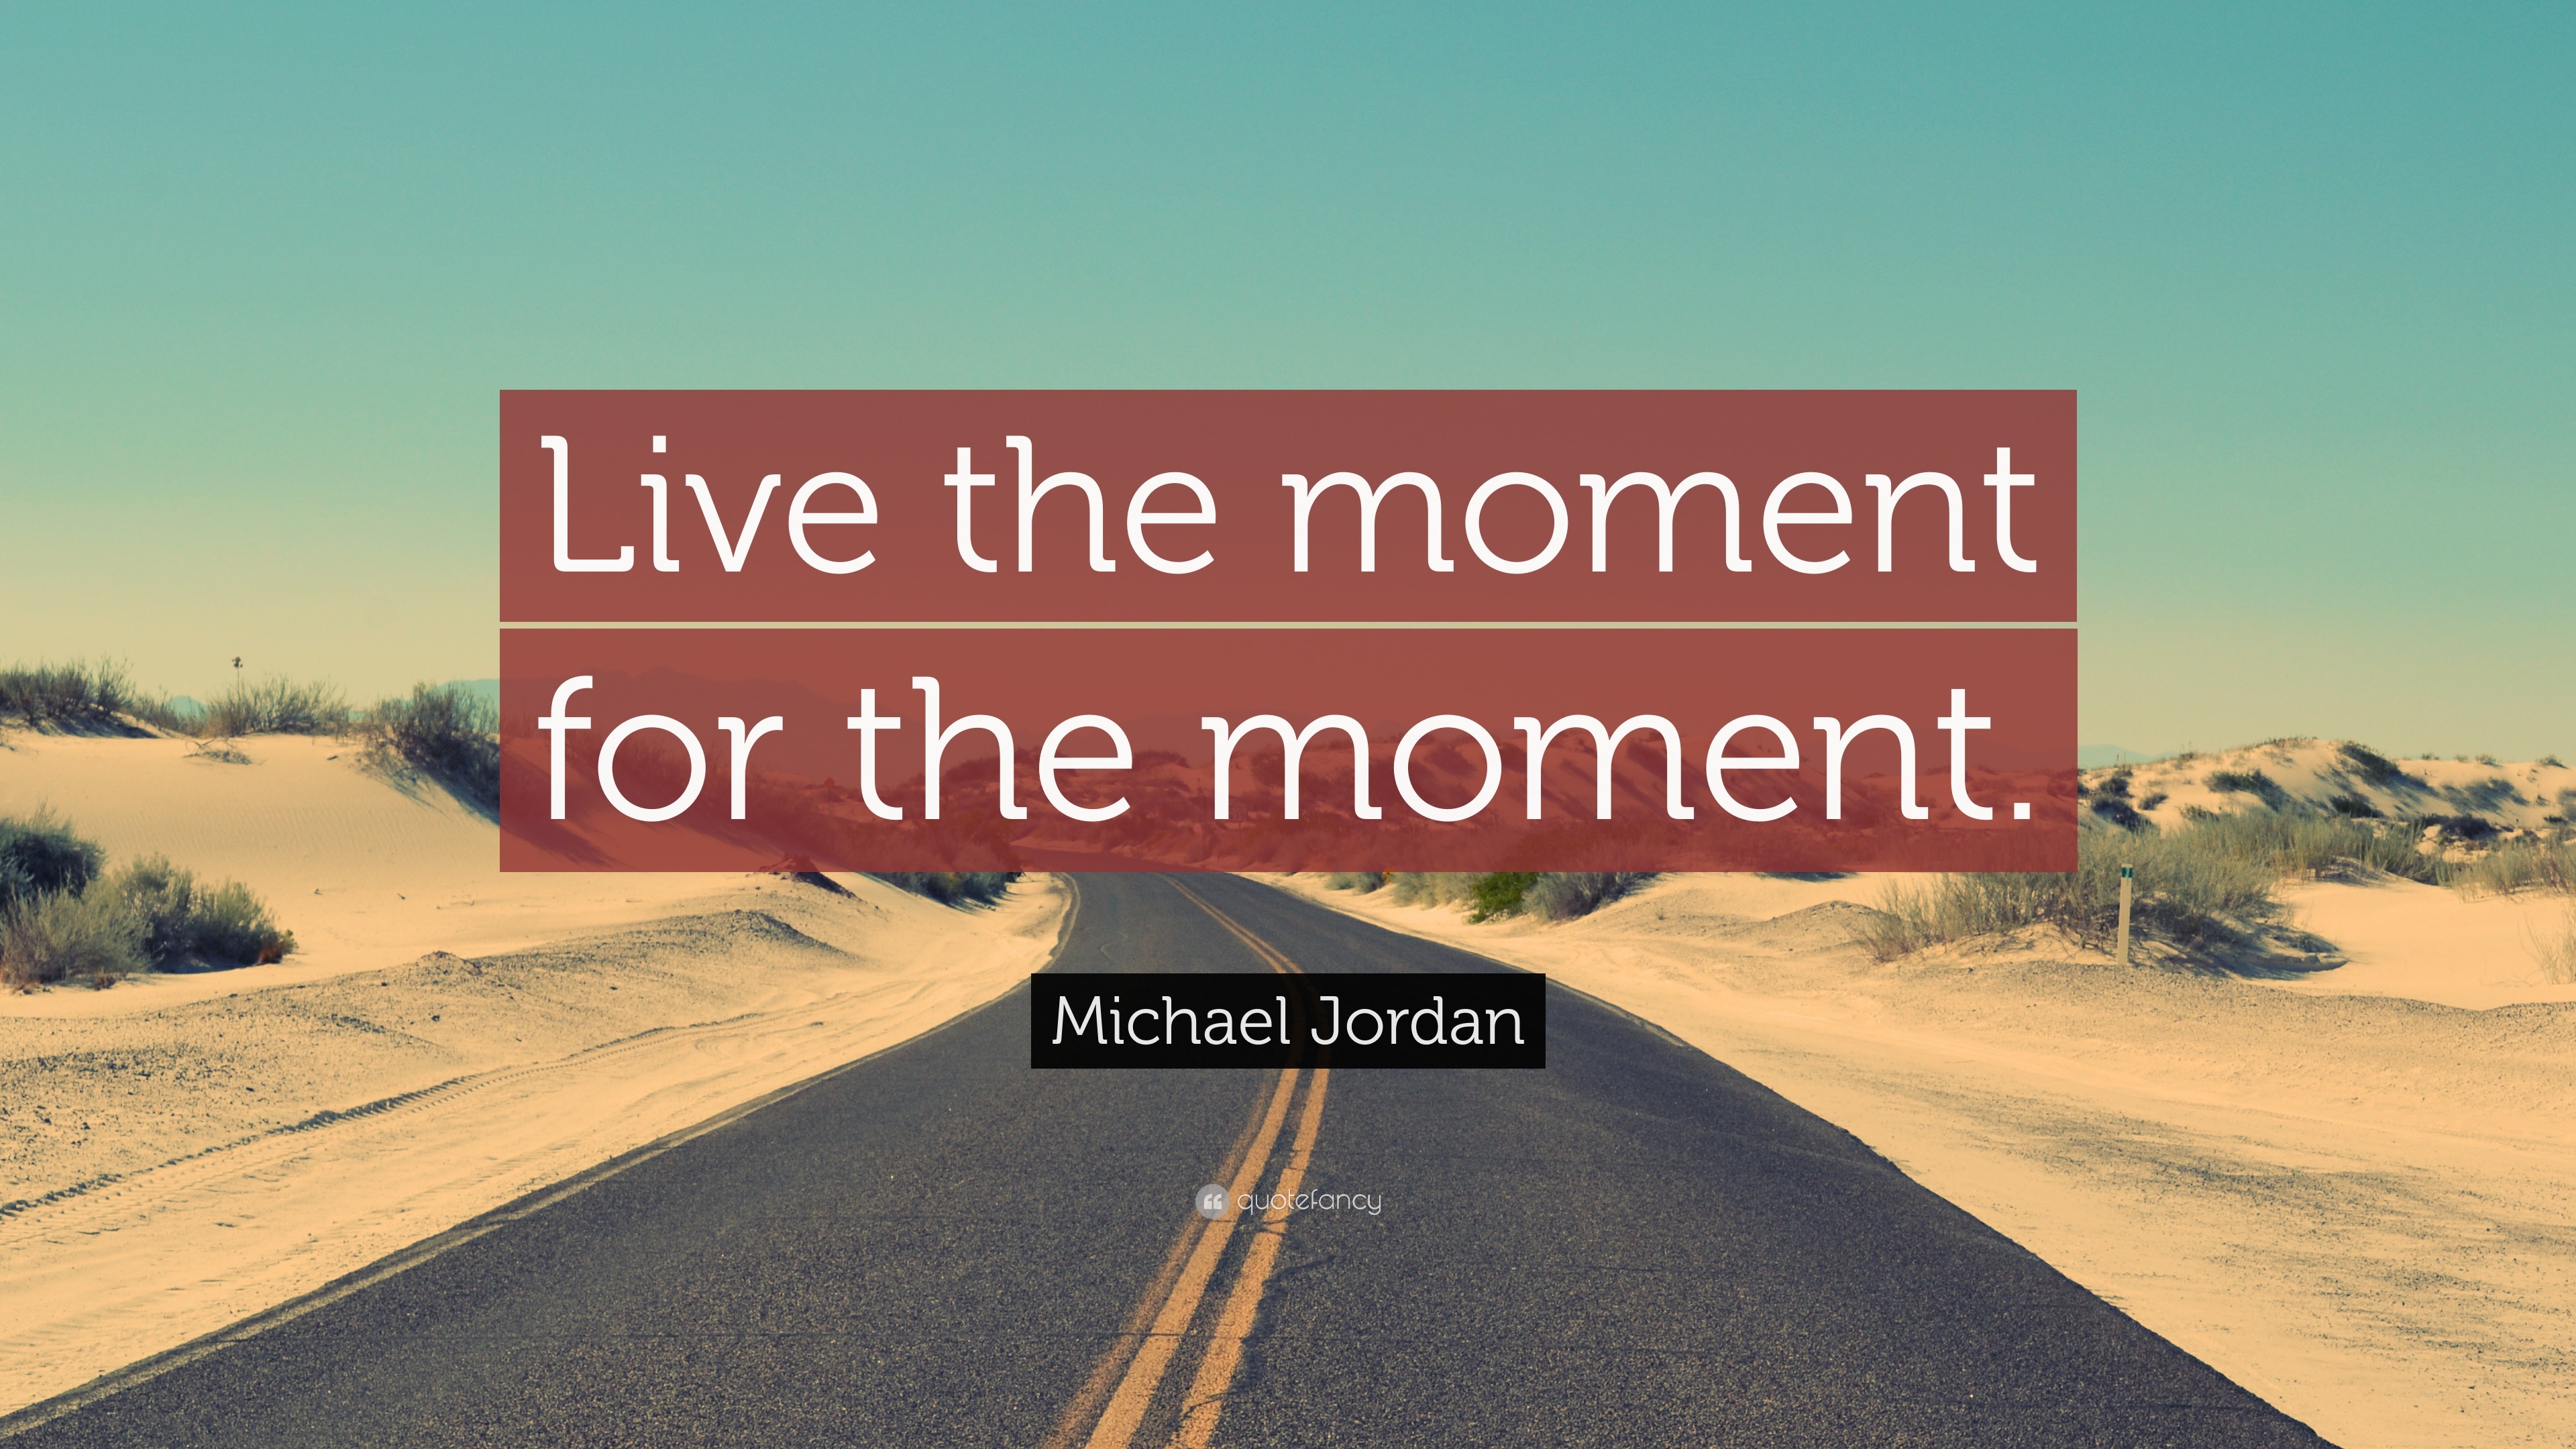 Michael Jordan Quote: 'Live the moment for the moment.'